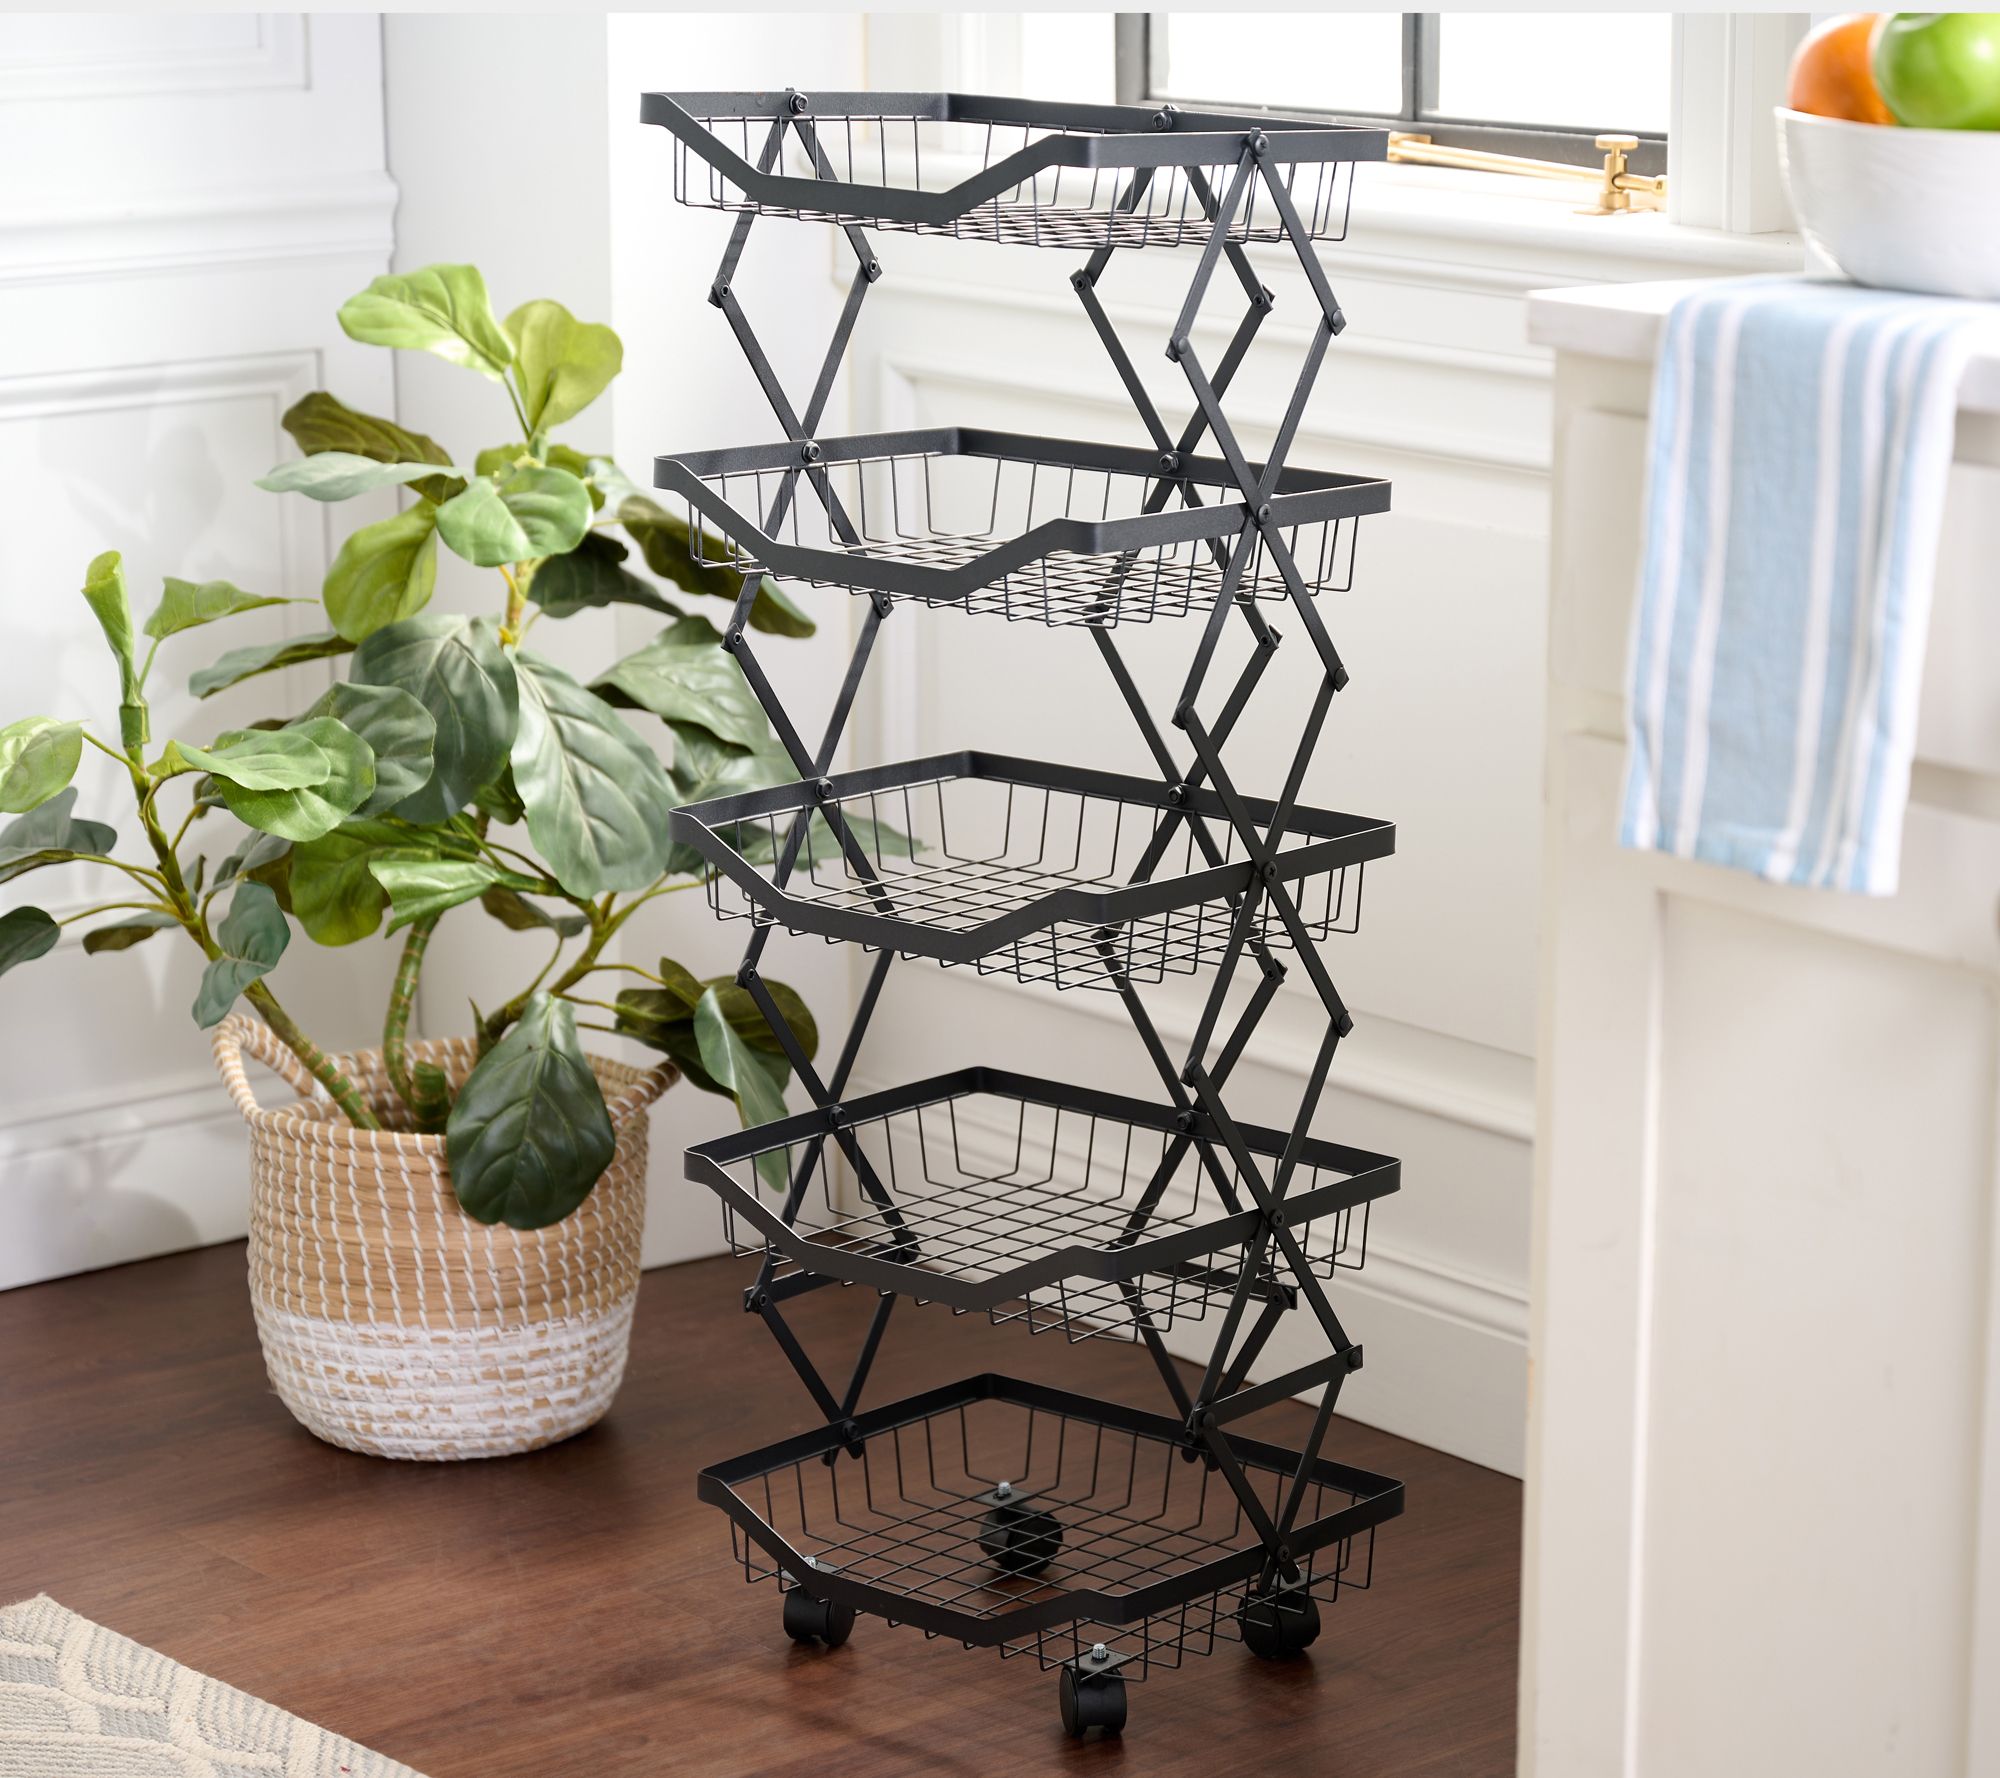 Rotating Egg Storage Rack Product Review 